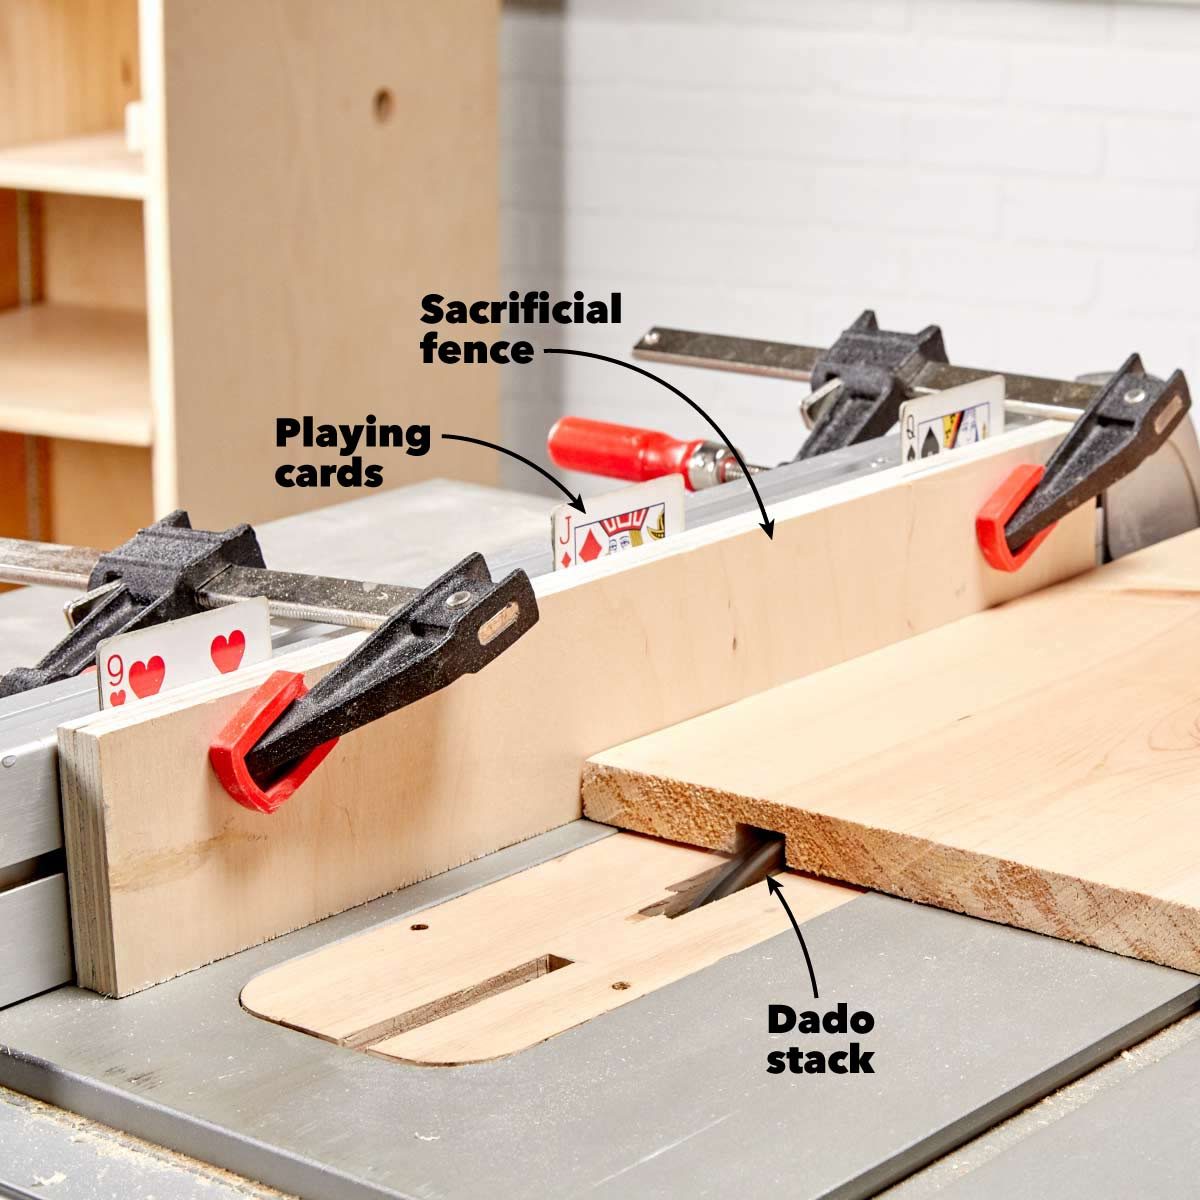 playing card adjustments table saw